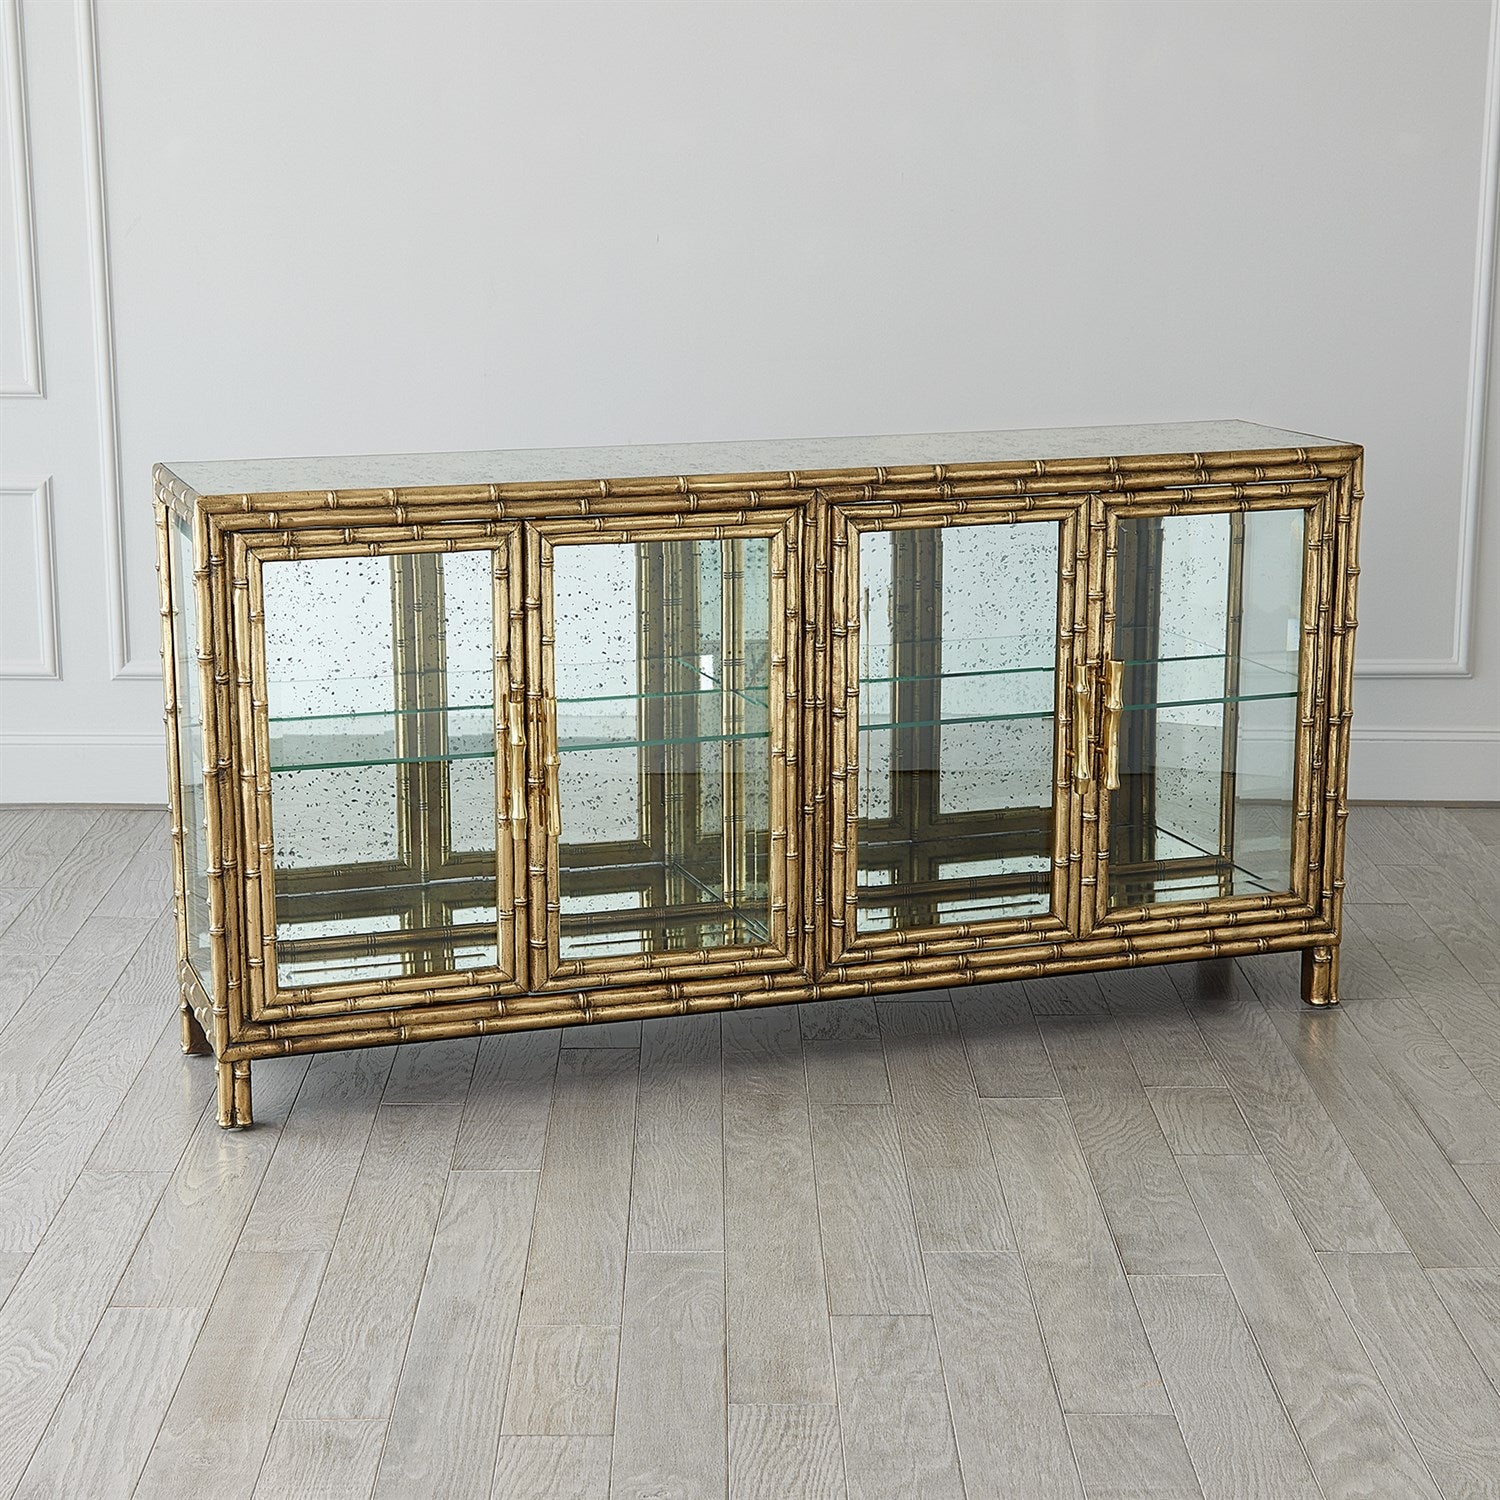 ANTIQUE MIRRORED BAMBOO STYLE DISPLAY CABINET, TROPICAL STYLE BRASS CABINET FOR SALE